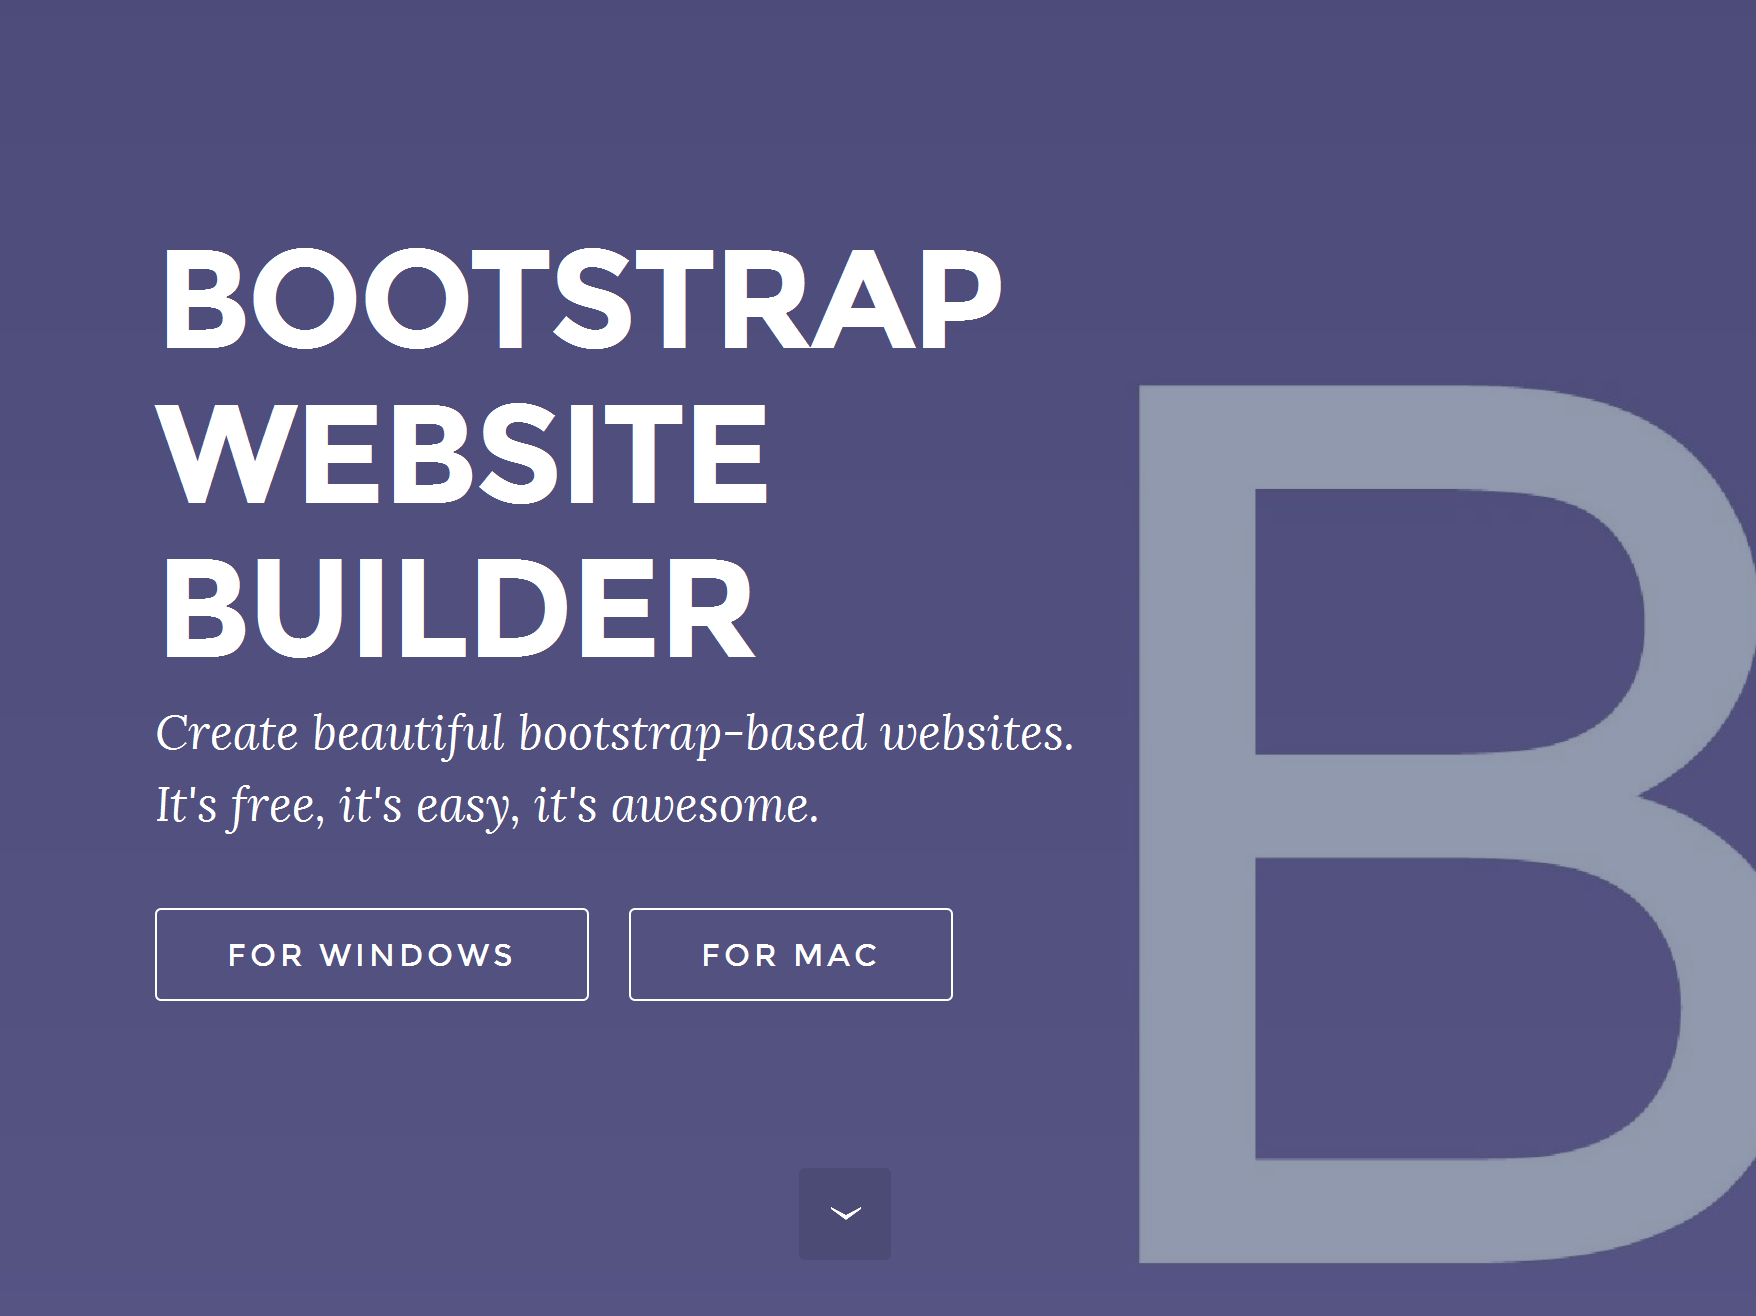 bootstrap popup